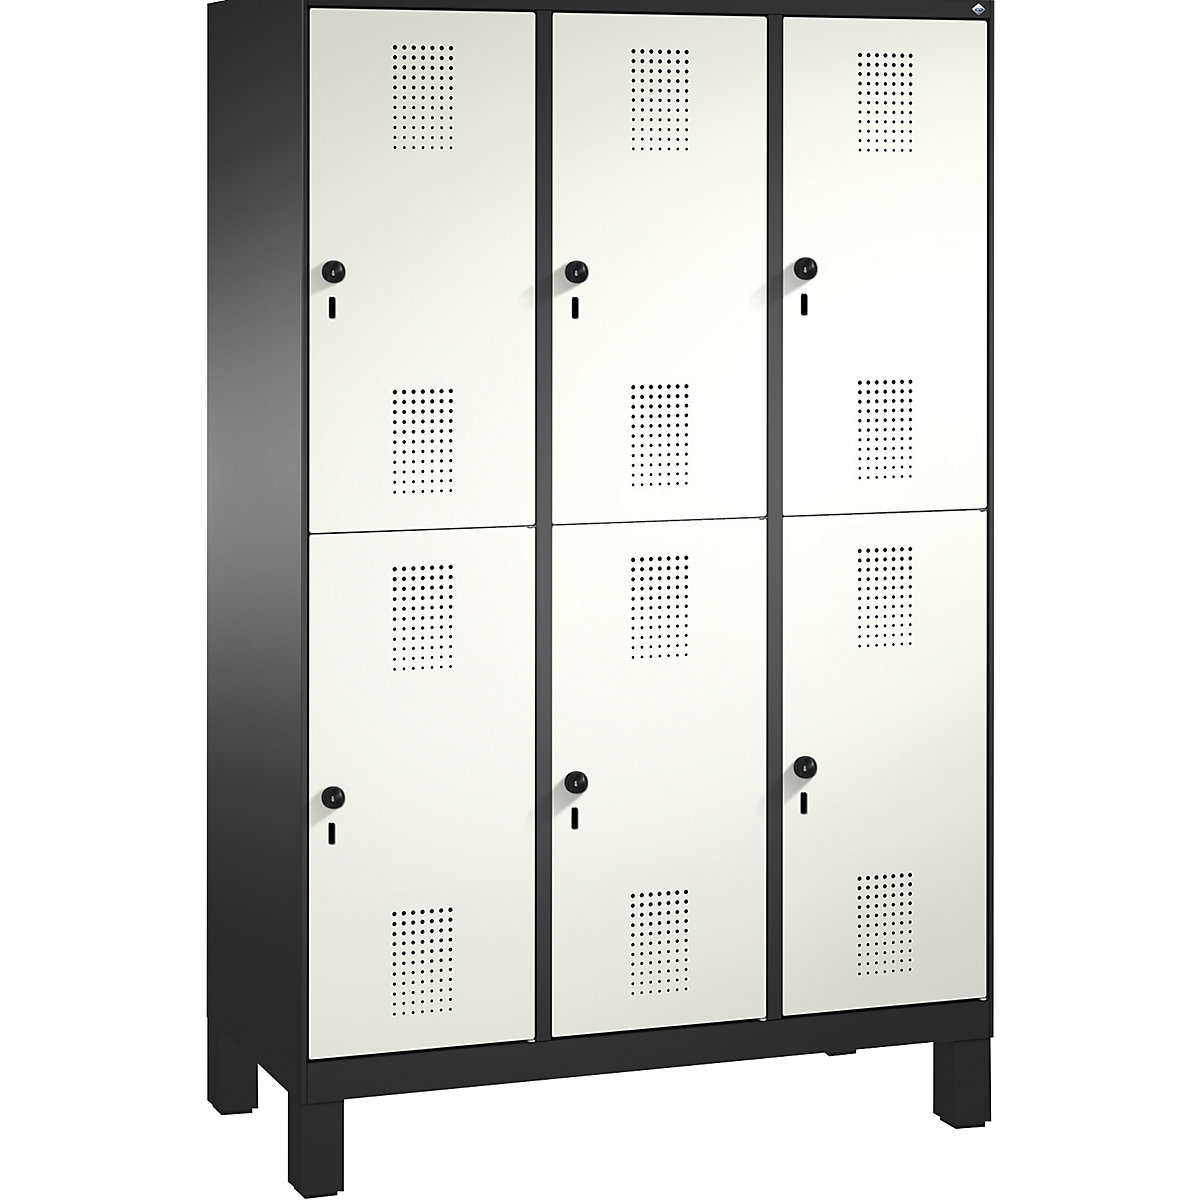 EVOLO cloakroom locker, double tier, with feet – C+P, 3 compartments, 2 shelf compartments each, compartment width 400 mm, black grey / traffic white-5